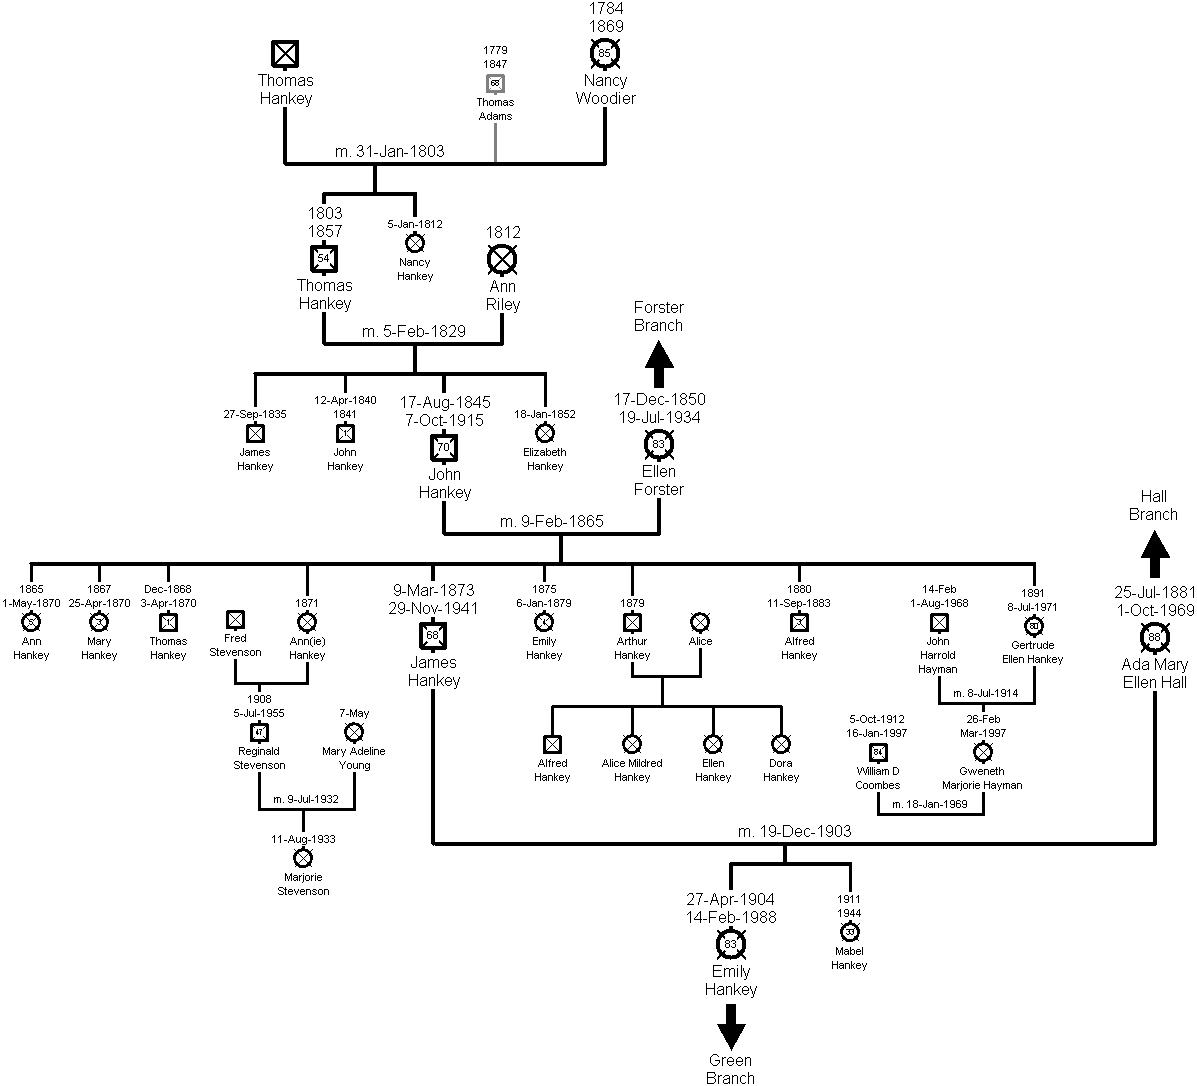 Family Tree of the Hankey Branch